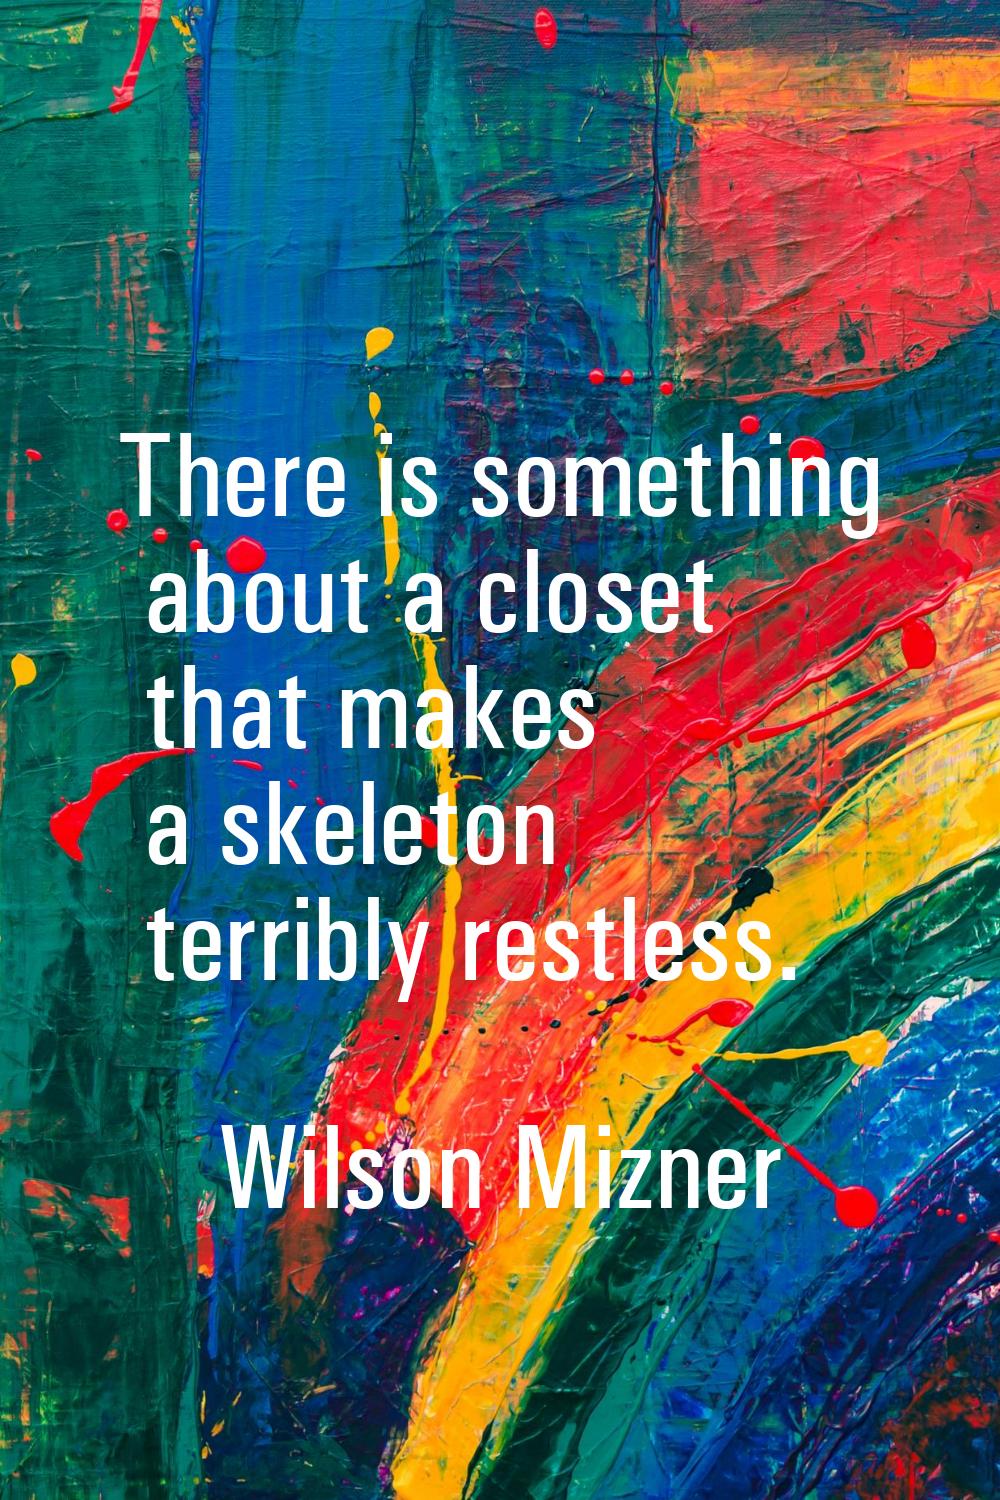 There is something about a closet that makes a skeleton terribly restless.